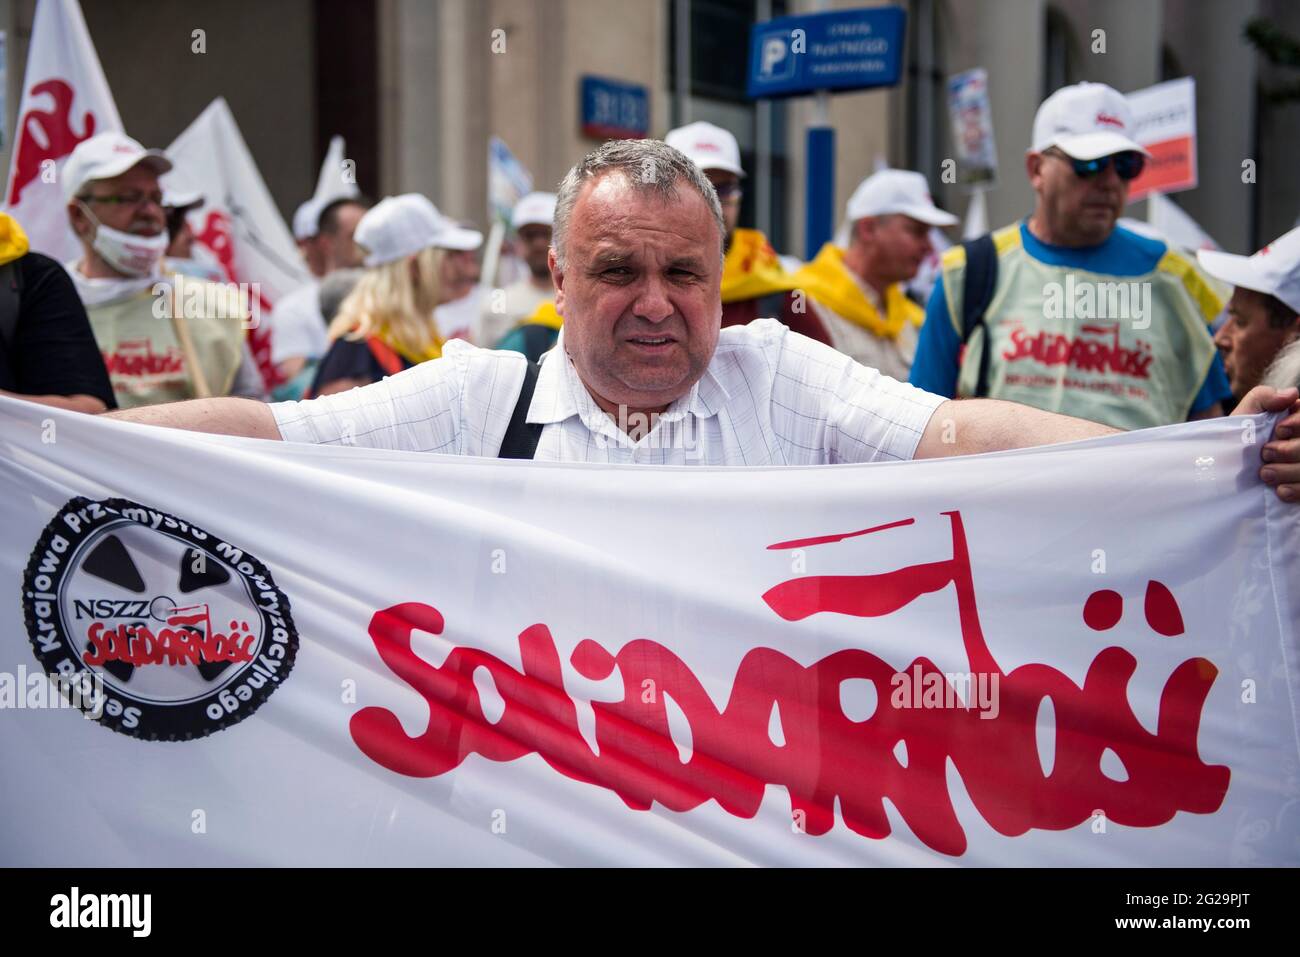 The legendary logo of Solidarnosc (Solidarity) is seen on a flag held by a miner during the demonstration.Thousands of Polish coal mining and energetics workers protested in Warsaw against the gradual phasing out of coal use and against a European Union court order to immediately close down the Turow brown coal mine - the ruling was in response to a lawsuit by the neighboring Czech Republic which says the mine is draining water from its border villages. The protest was organized by the Independent Self-Governing Trade Union 'Solidarnosc' (Solidarity). (Photo by Attila Husejnow/SOPA Images/Si Stock Photo